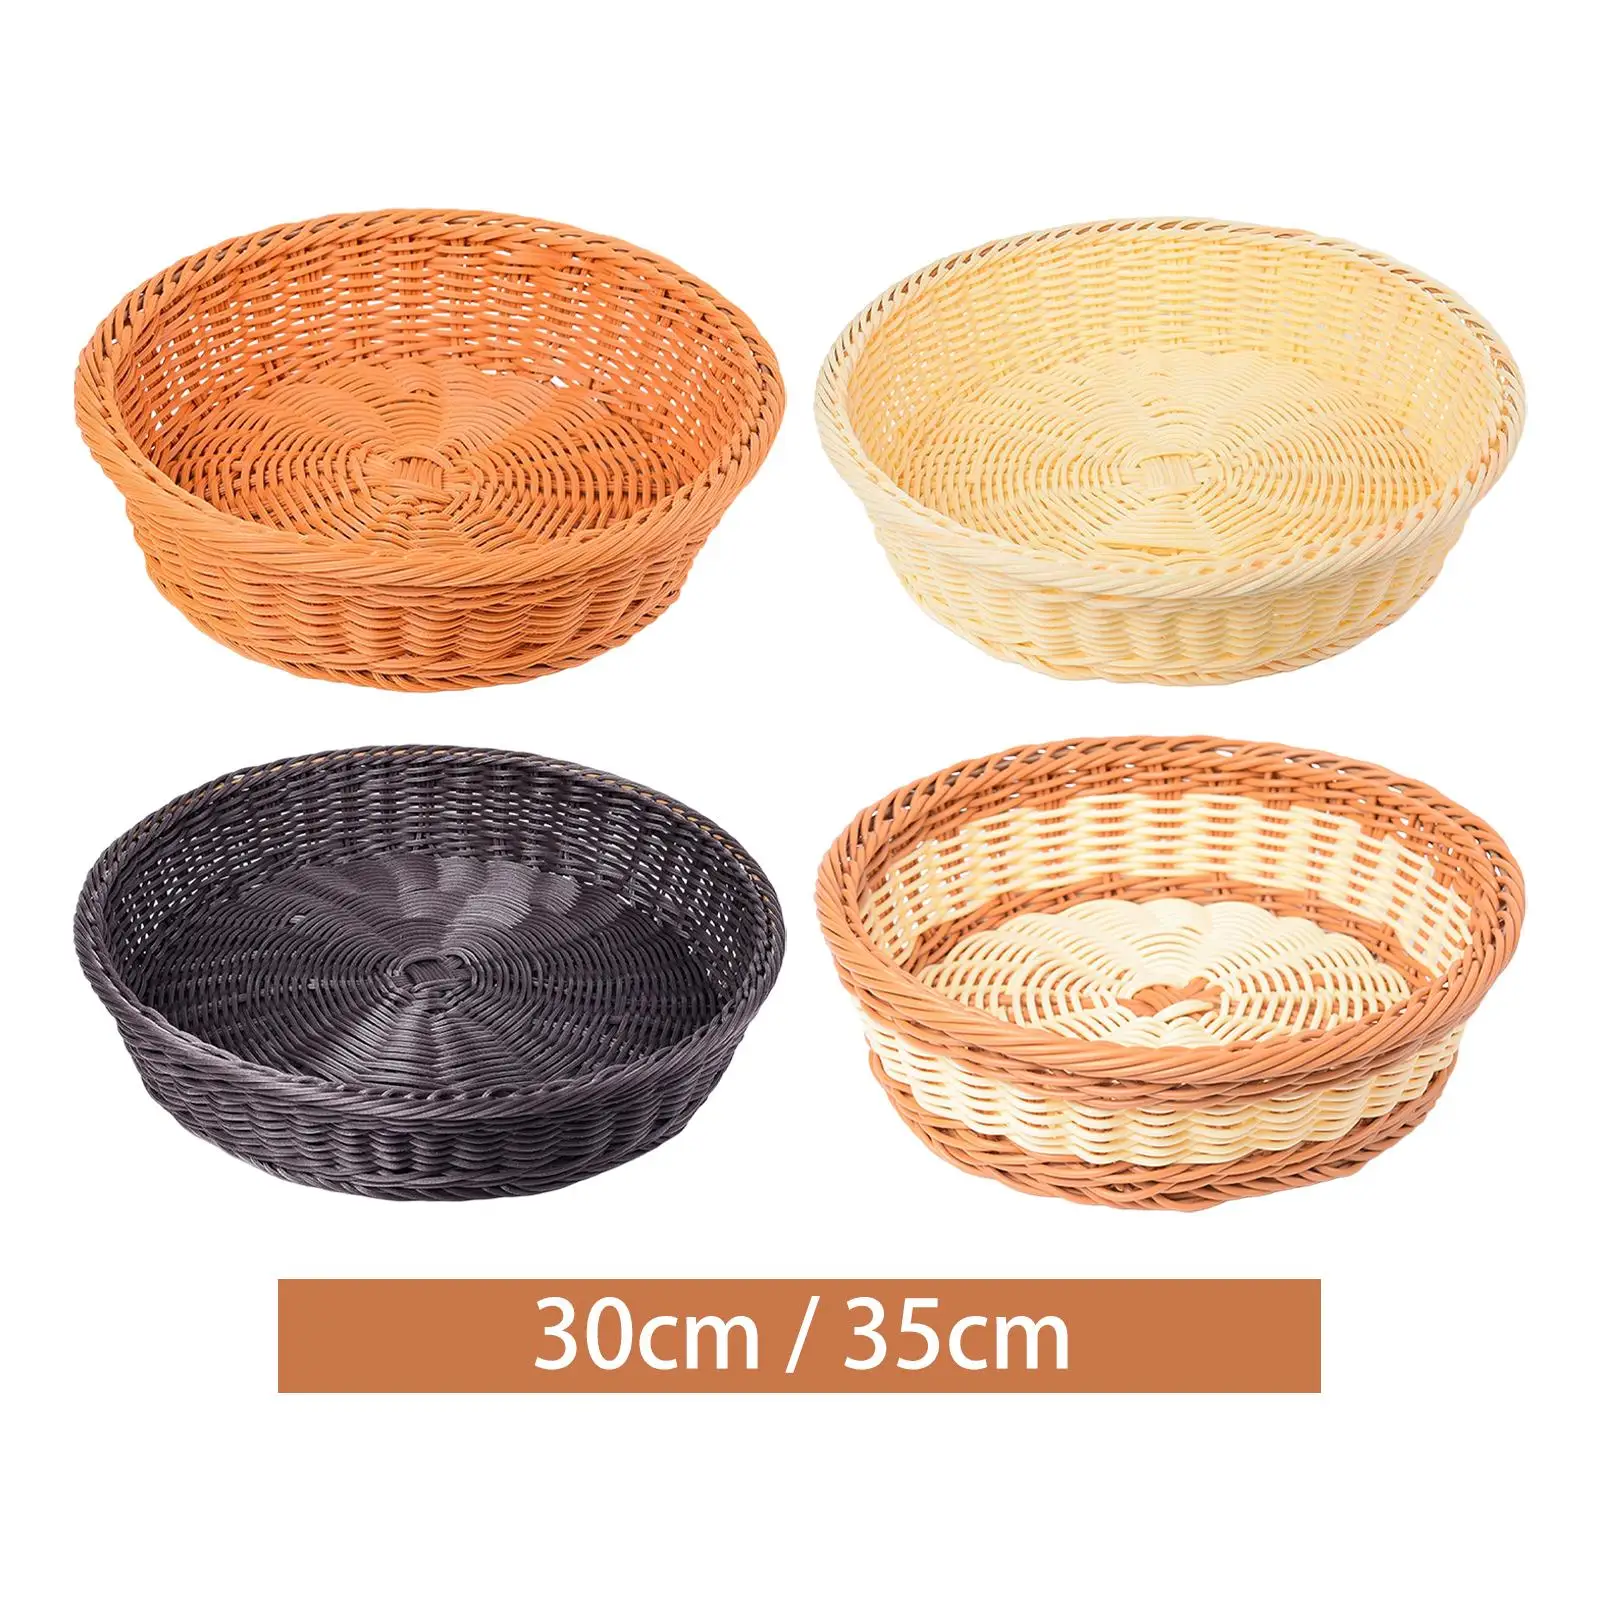 Kitchen Bread Box Handmade Woven Fruit Basket Rattan Bread Basket for Snacks Fruits Home Vegetables Dining Coffee Table